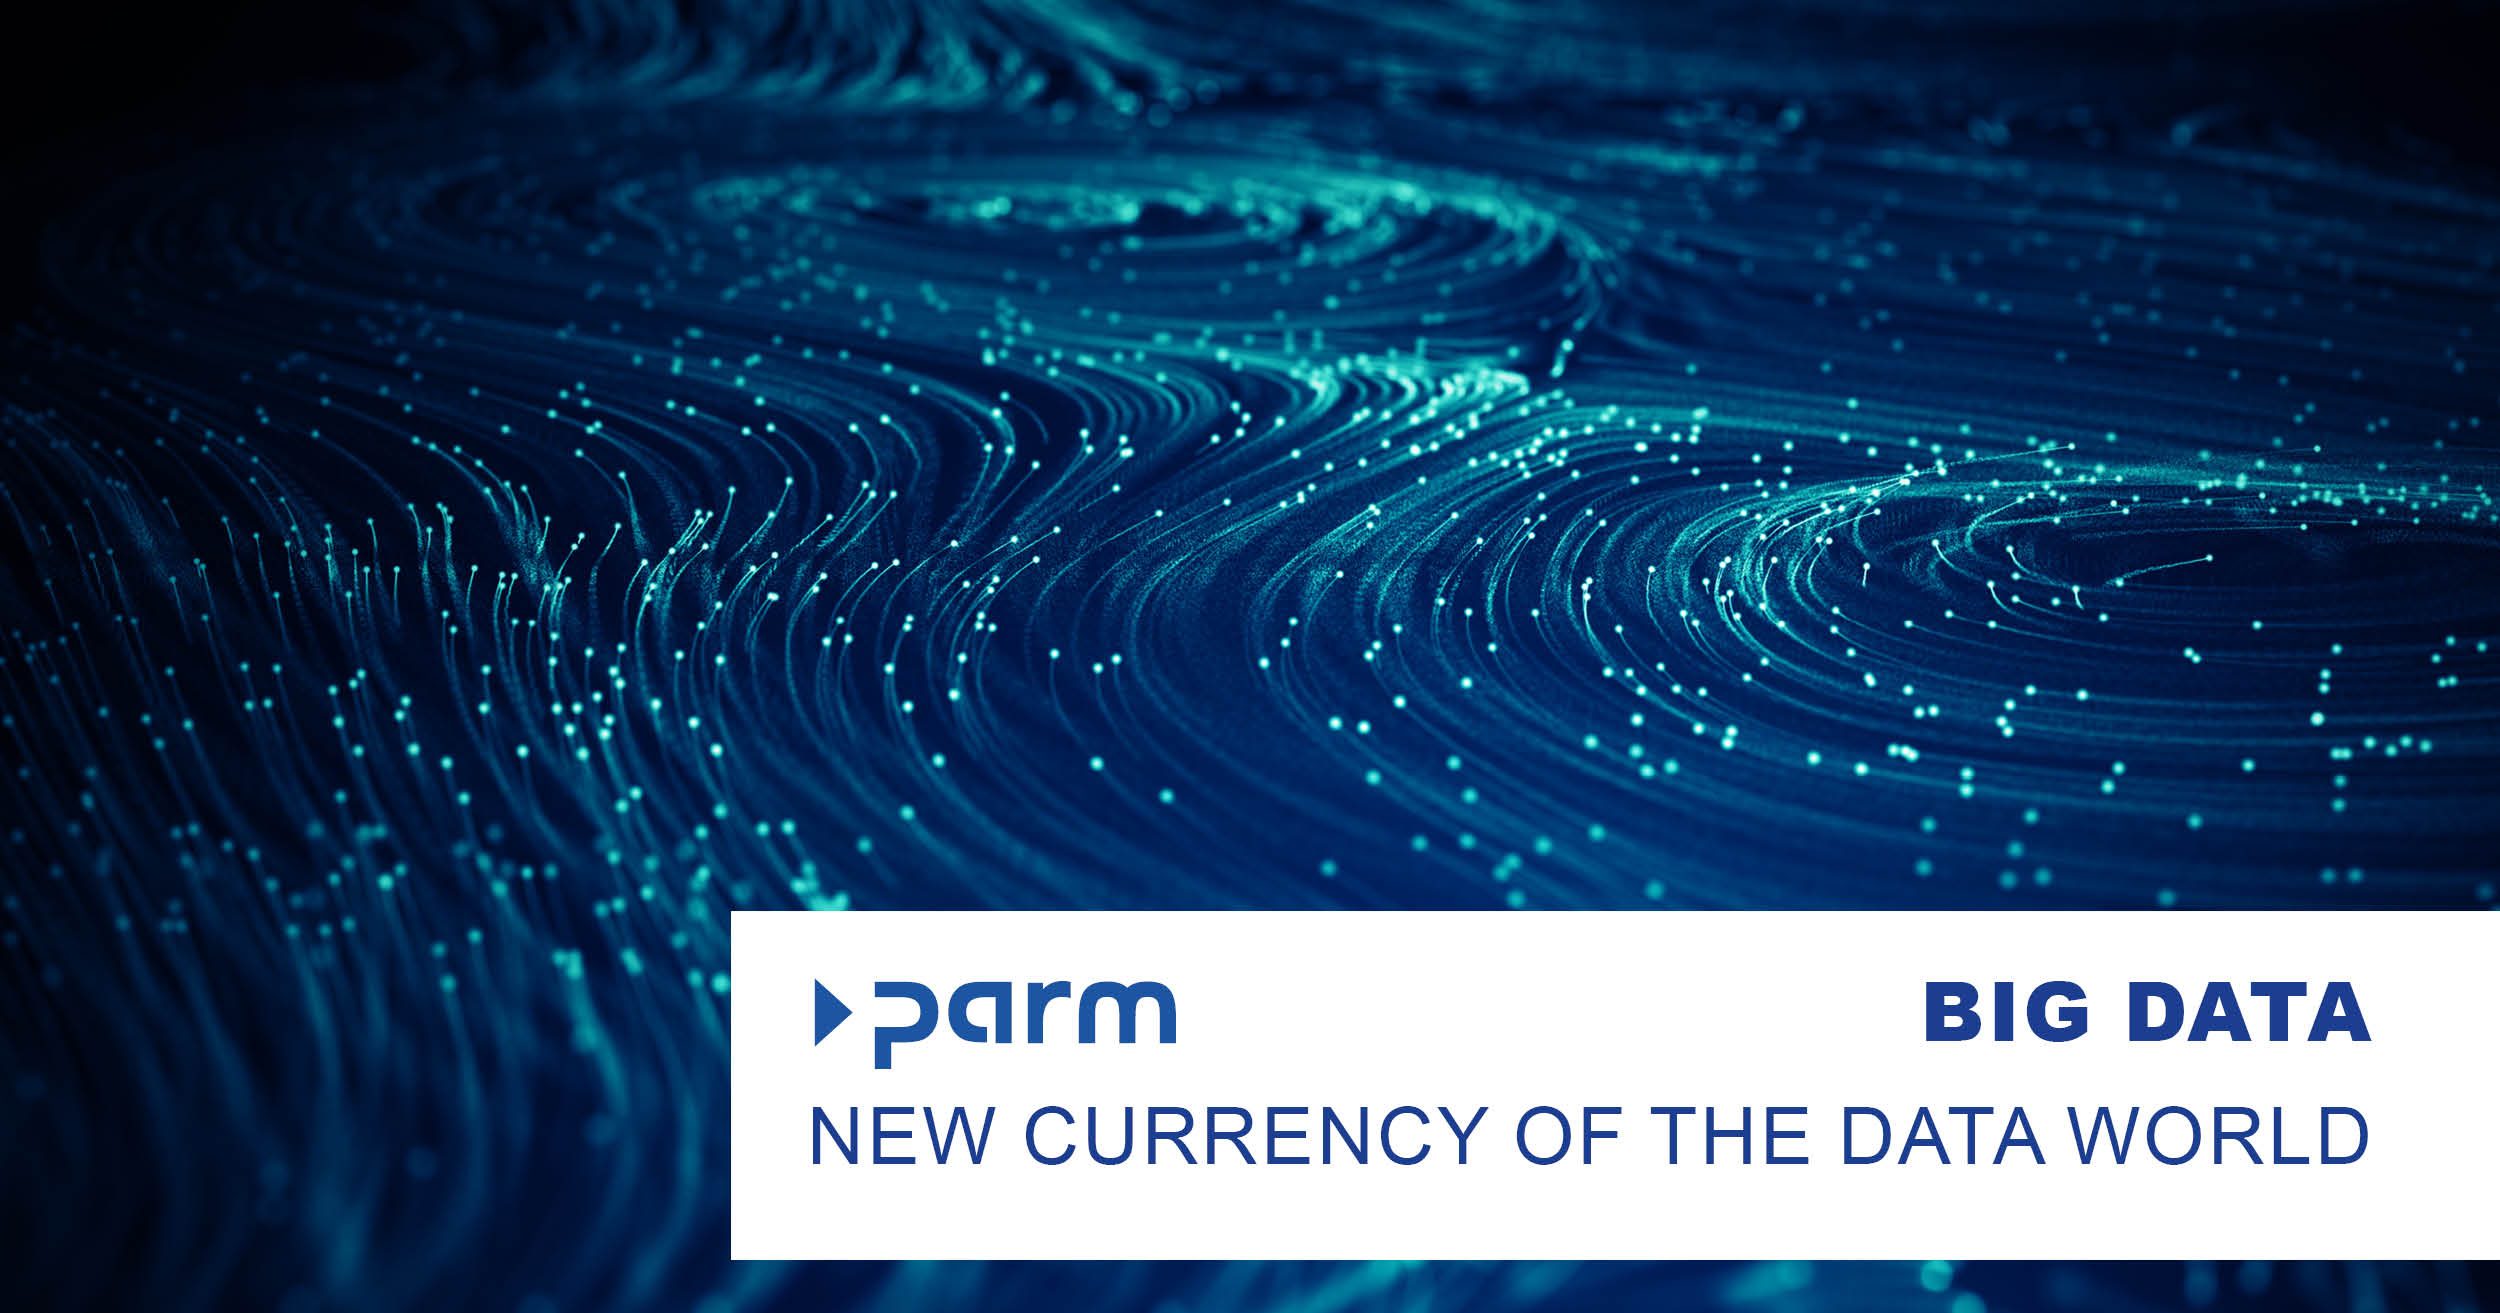 Big Data - the new currency of the data world